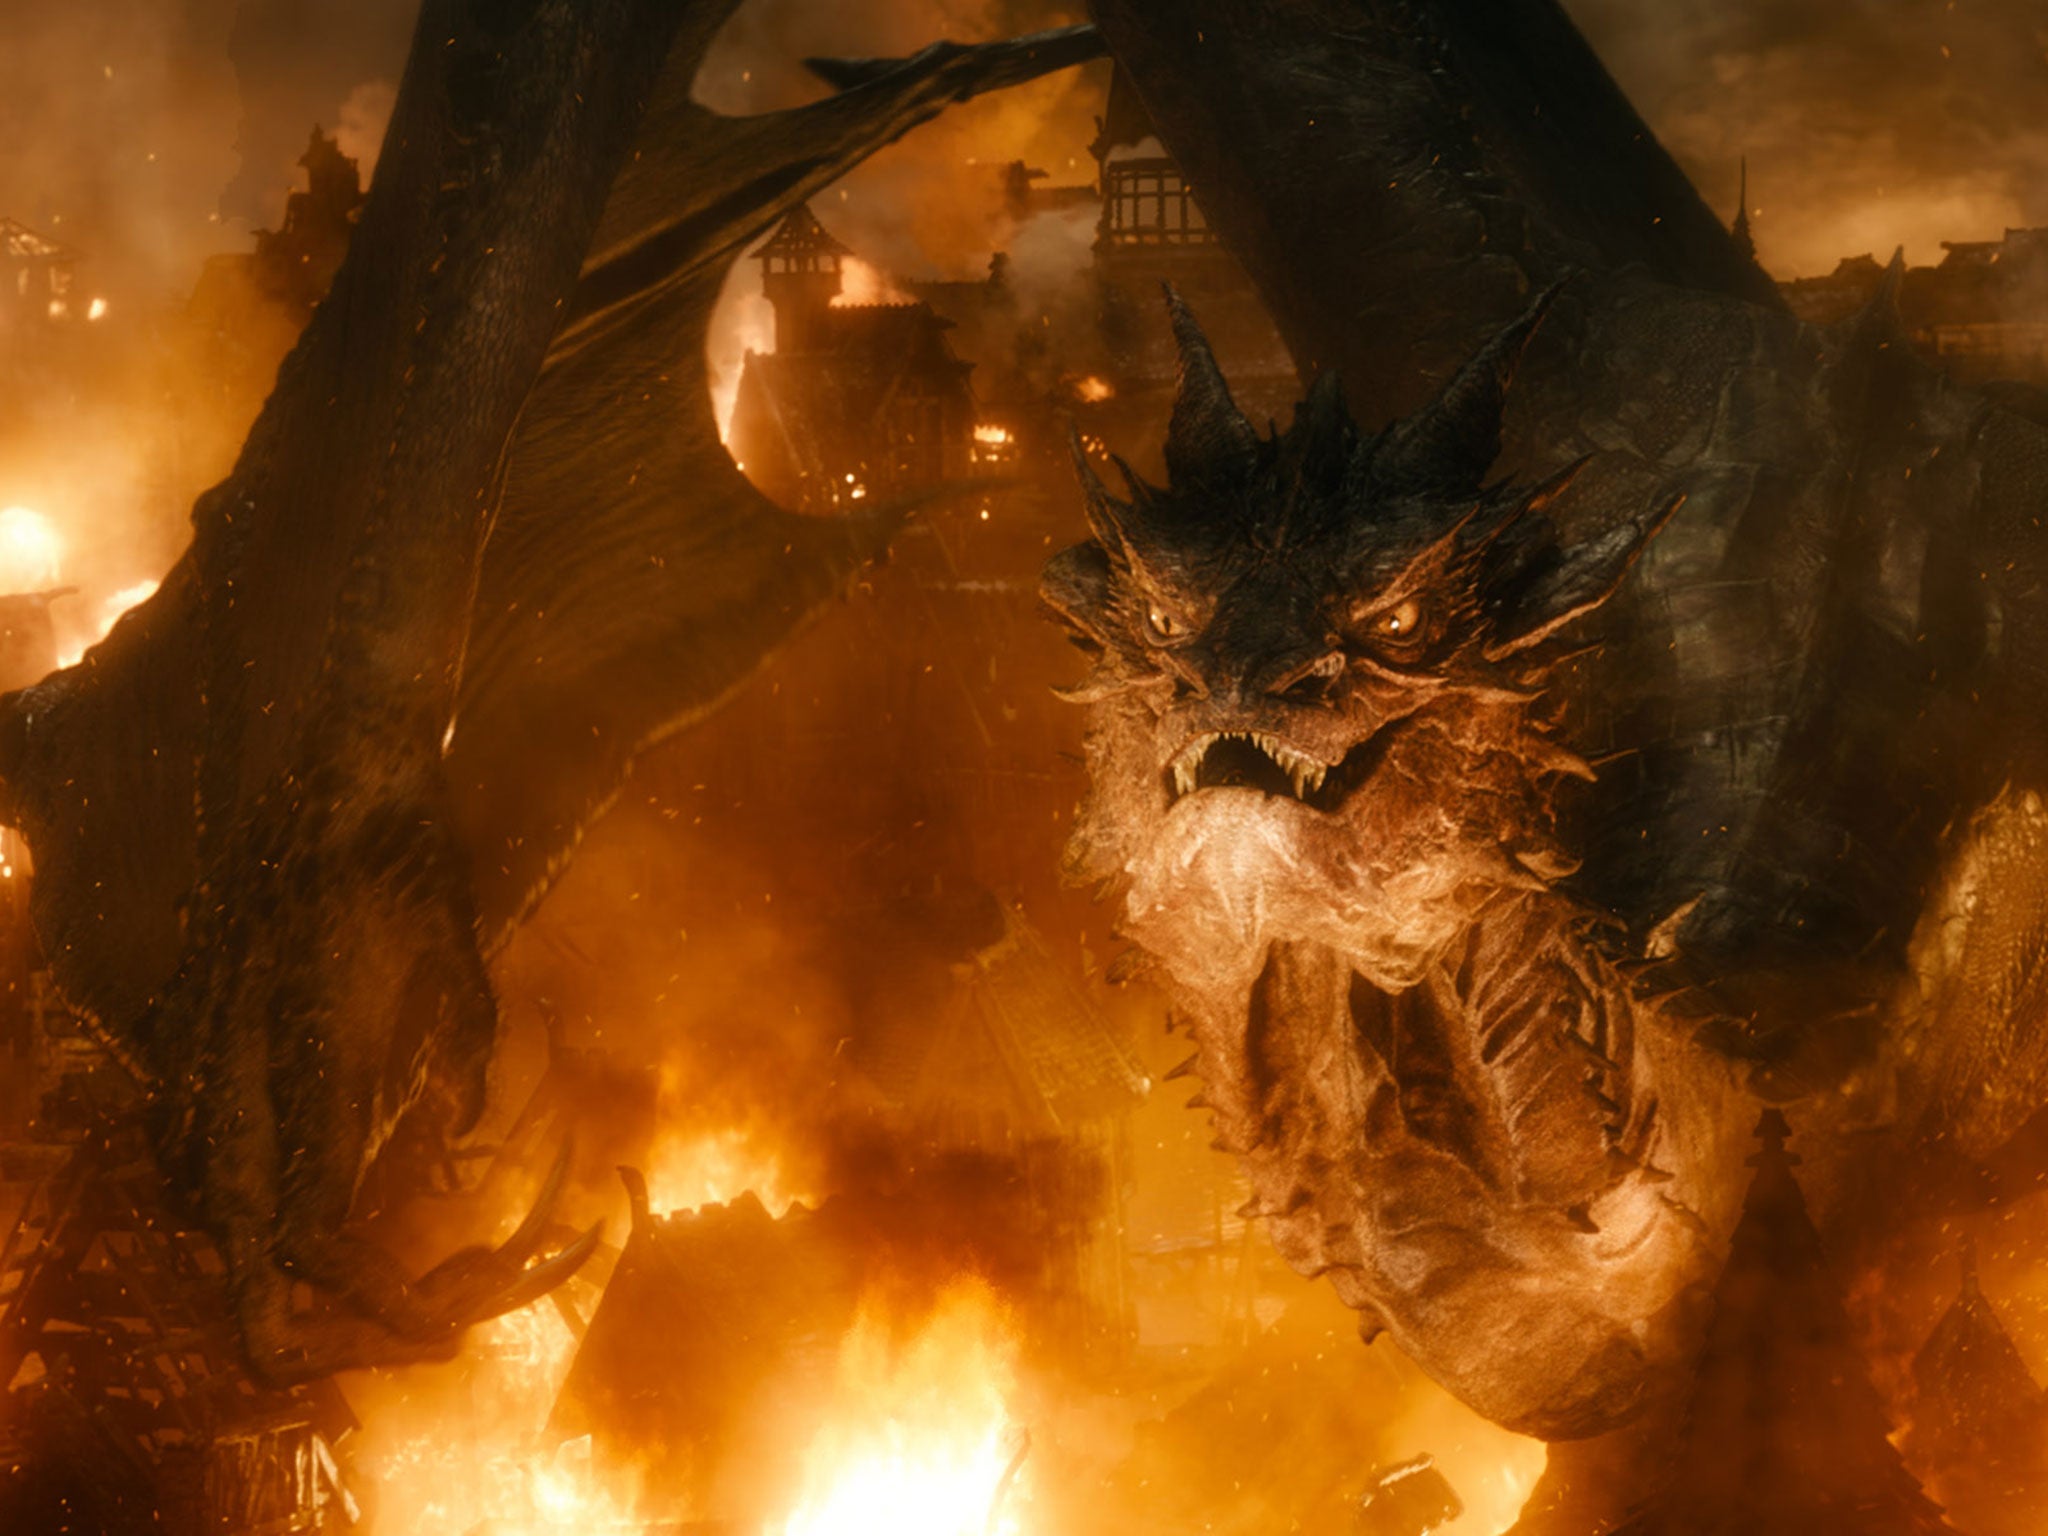 Benedict Cumberbatch voices dragon Smaug in The Hobbit: The Battle of the Five Armies